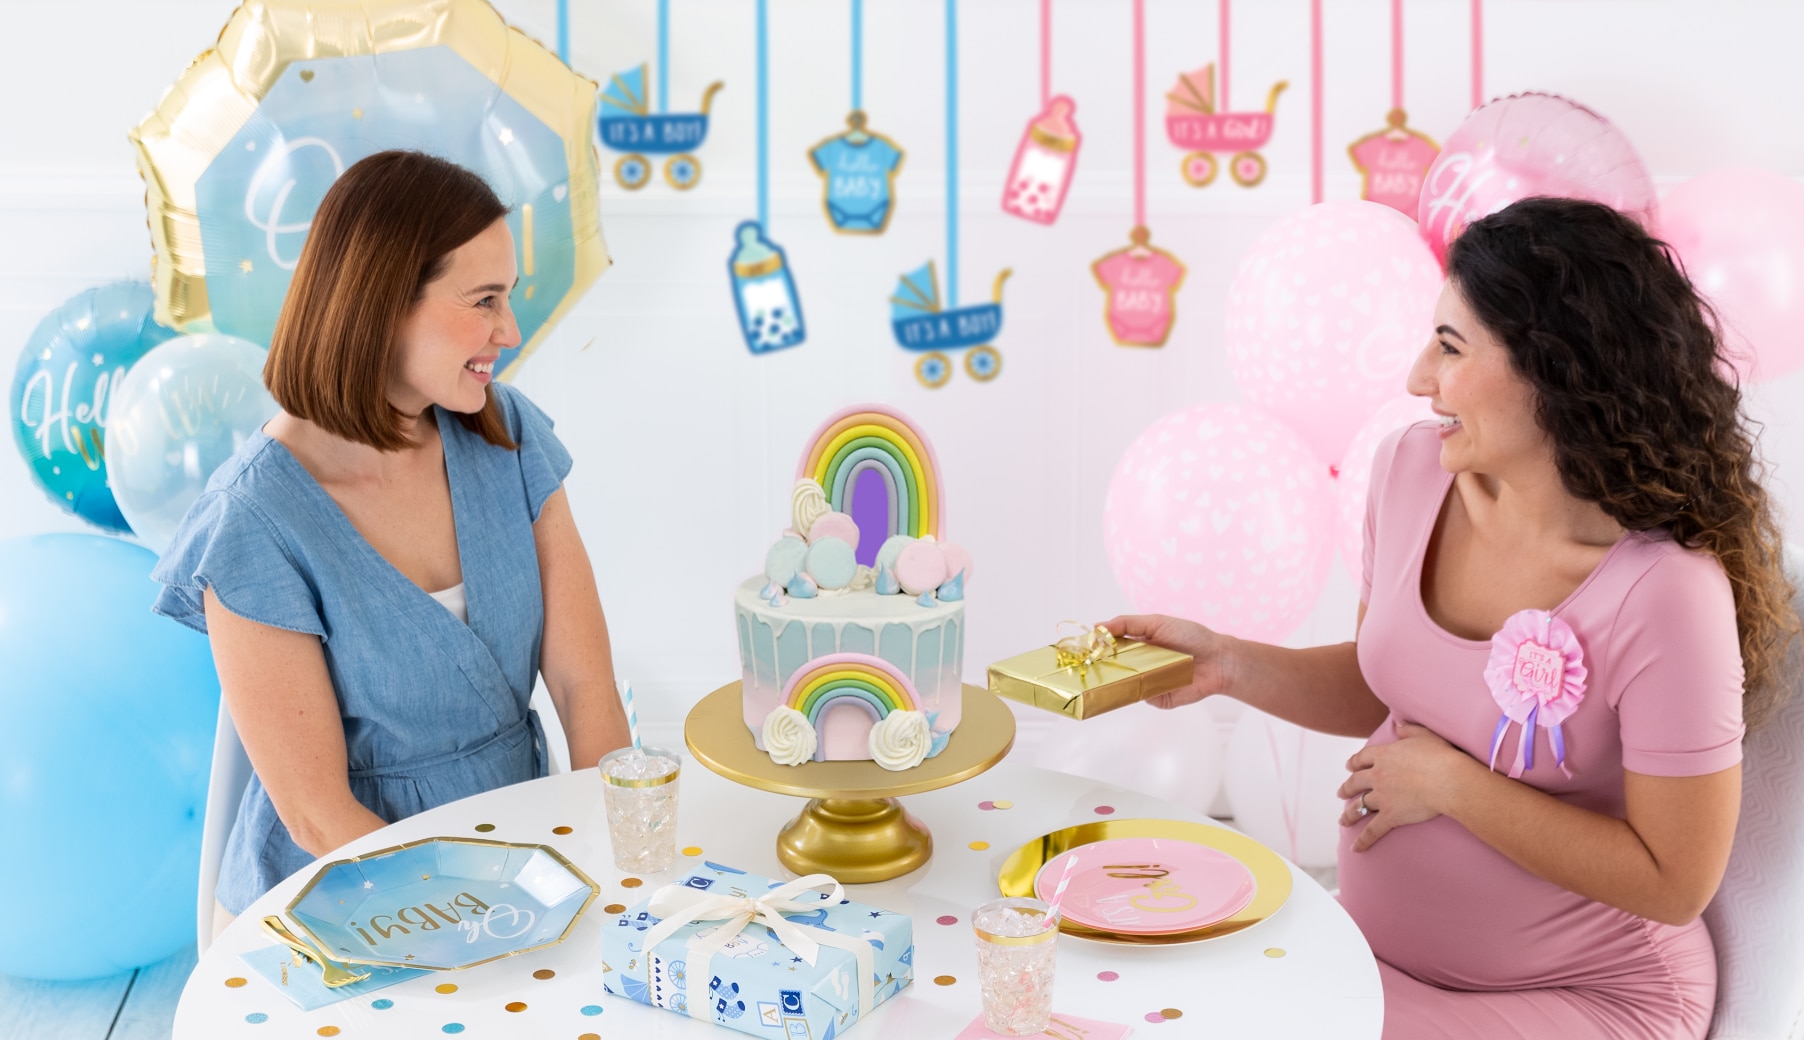 A pregnant woman and a friend sitting at a table in a room decorated in a pink and blue baby shower theme.